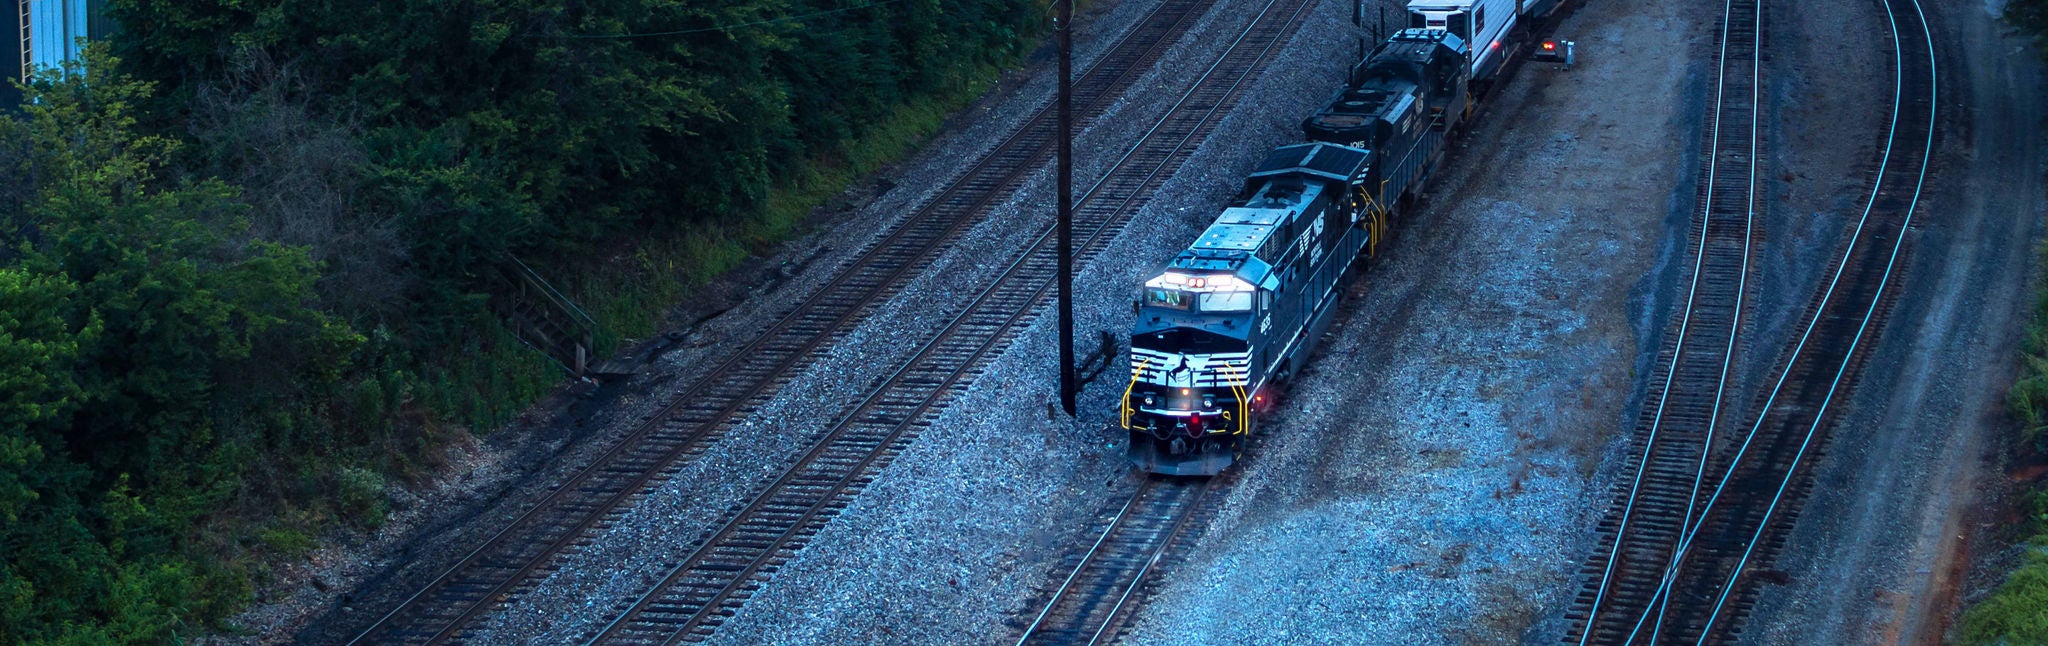 Aerial view of train driving down track in evening transporting low carbon fuels